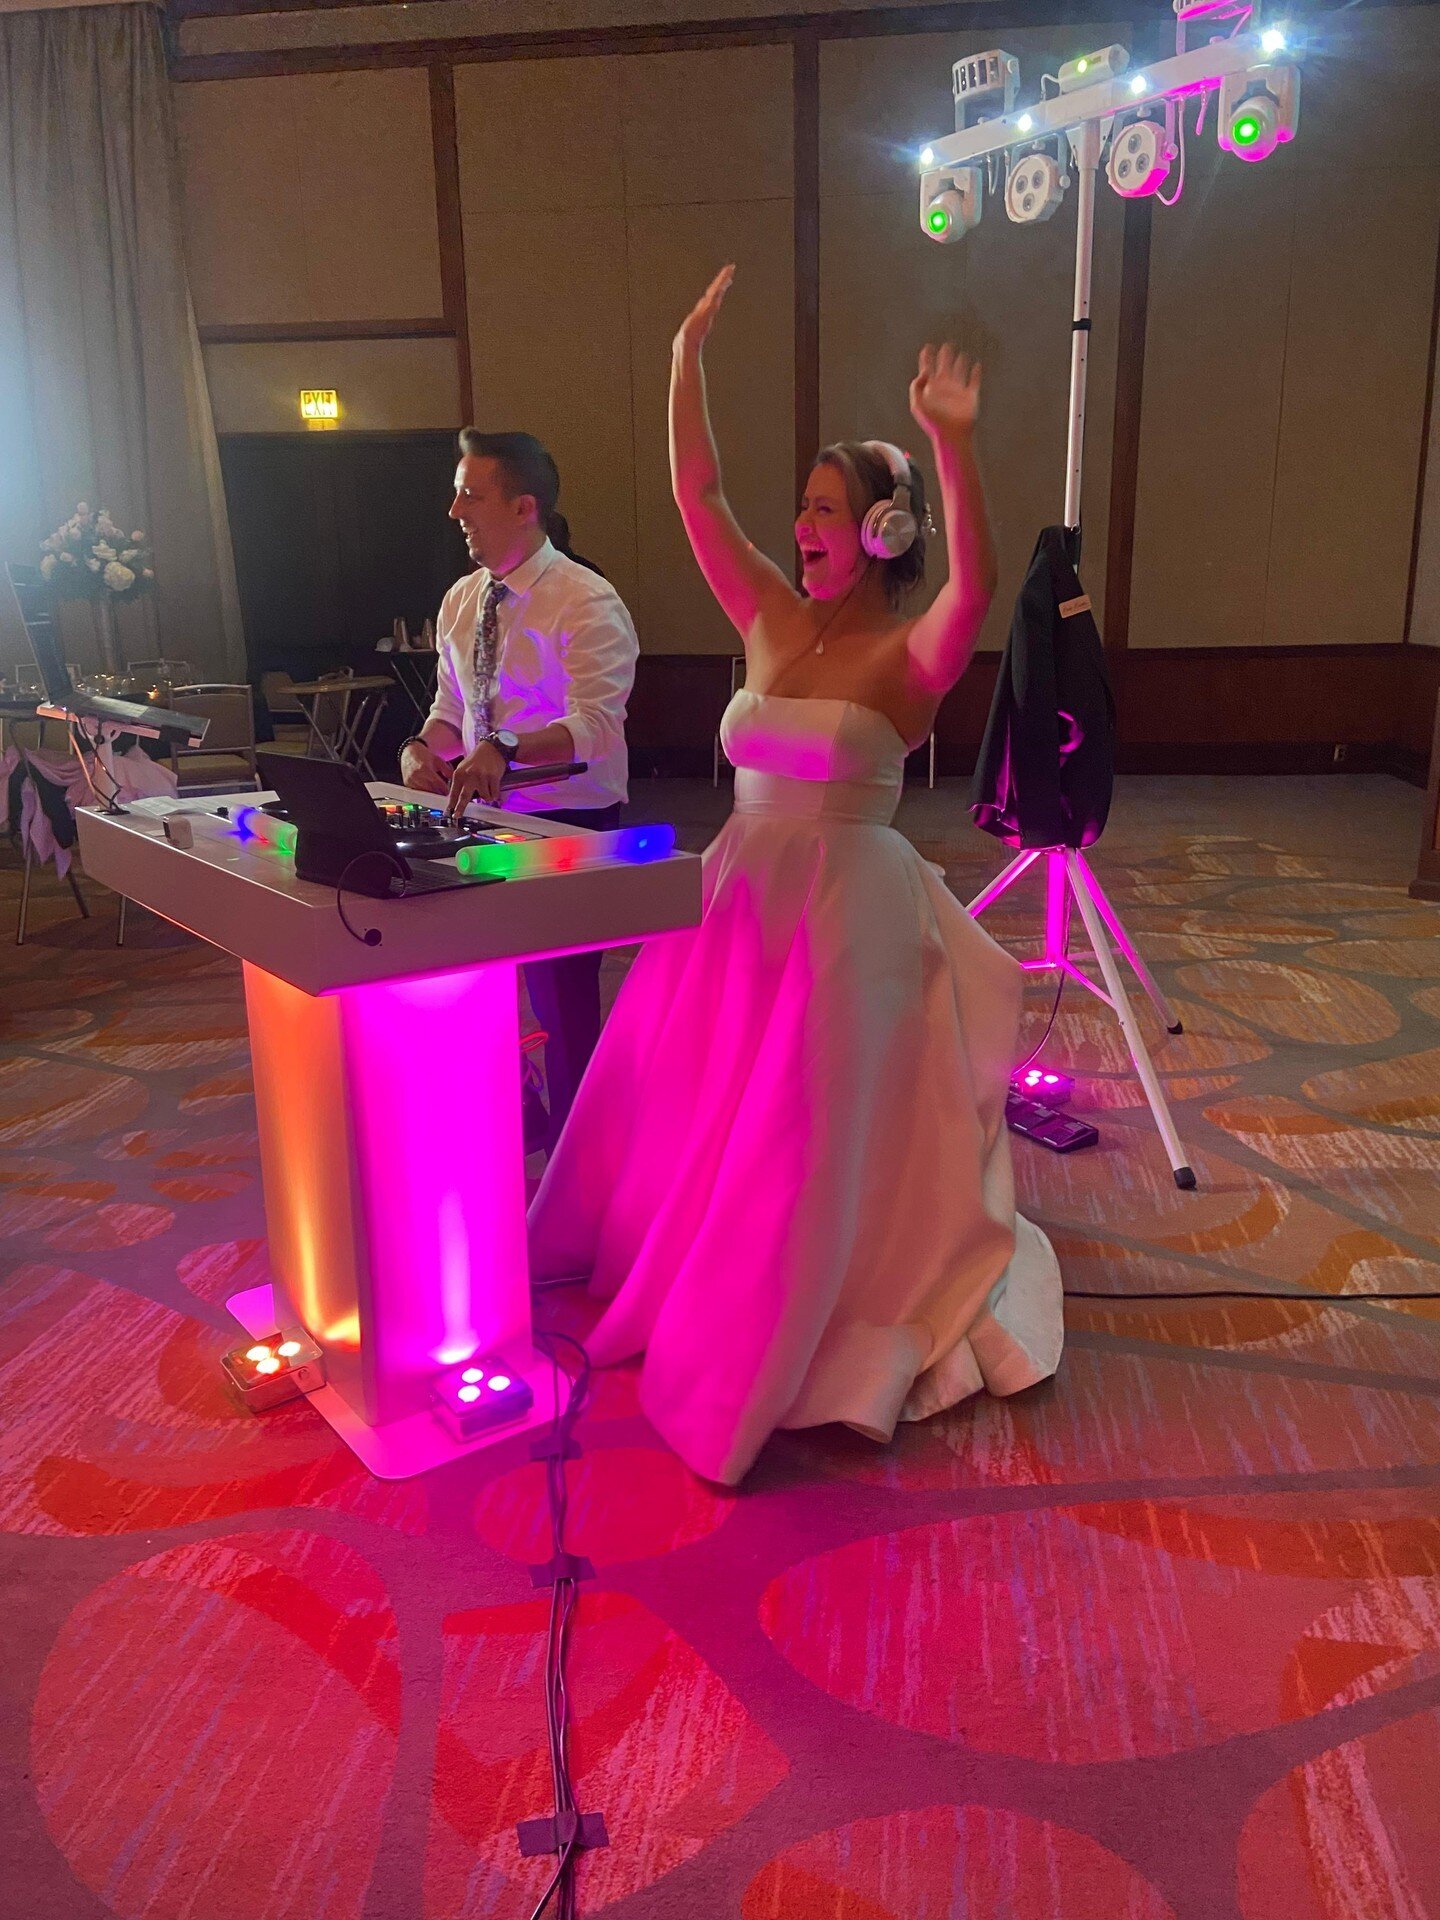 When the bride gets behind the board 🤘